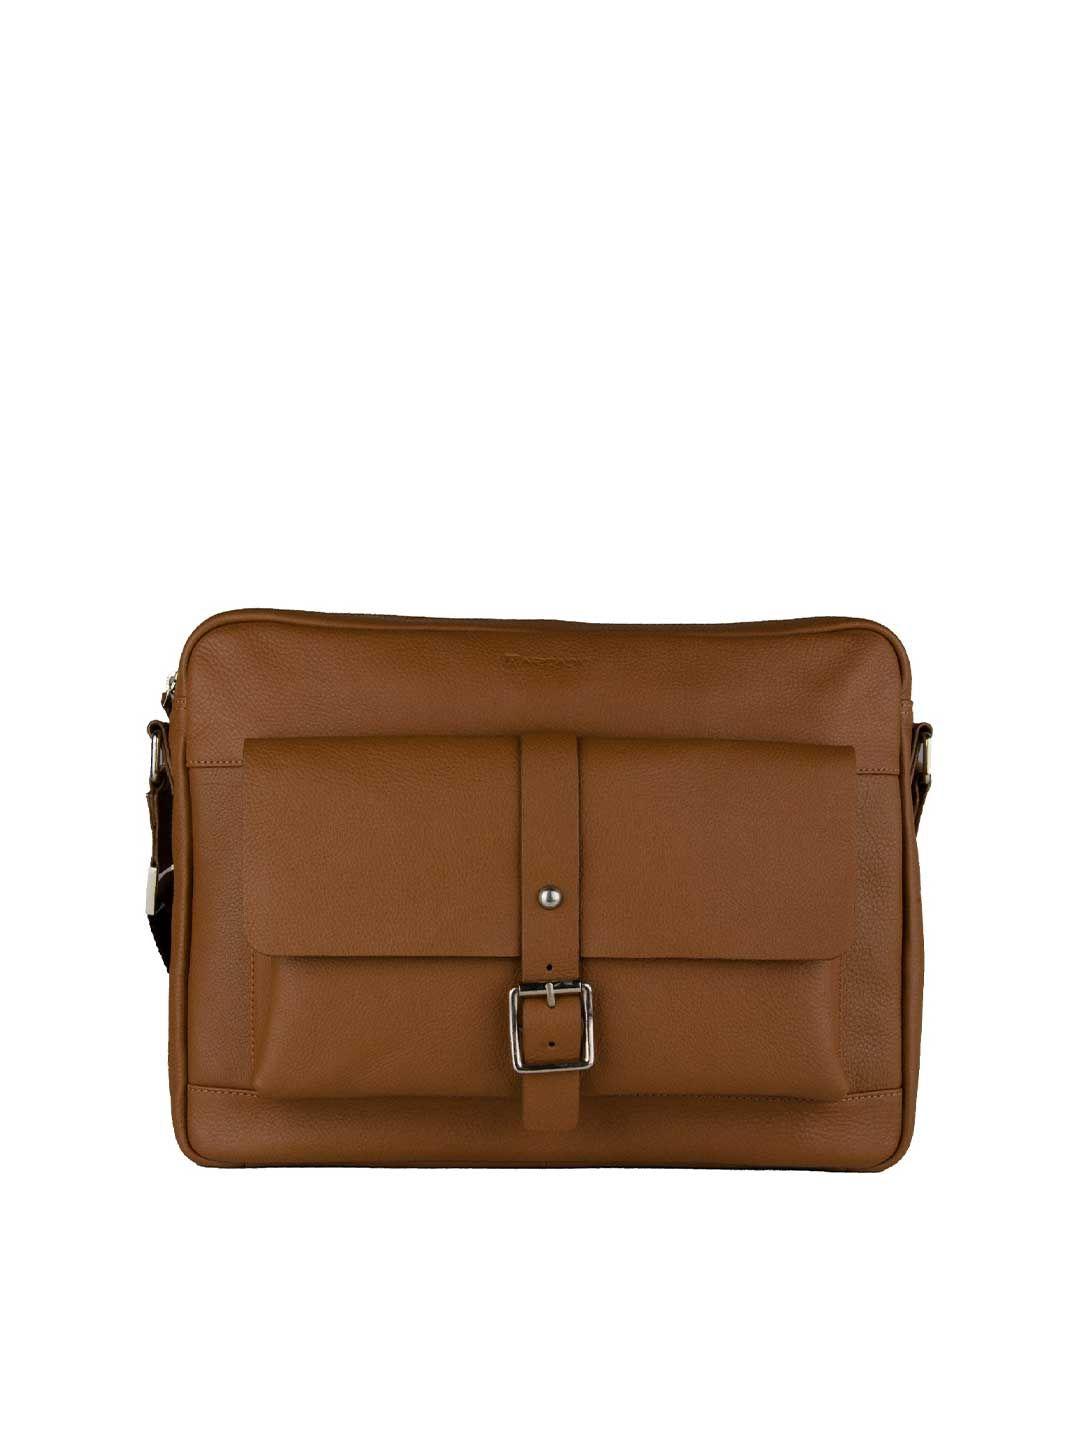 arcadio unisex brown & silver-toned textured leather laptop bag